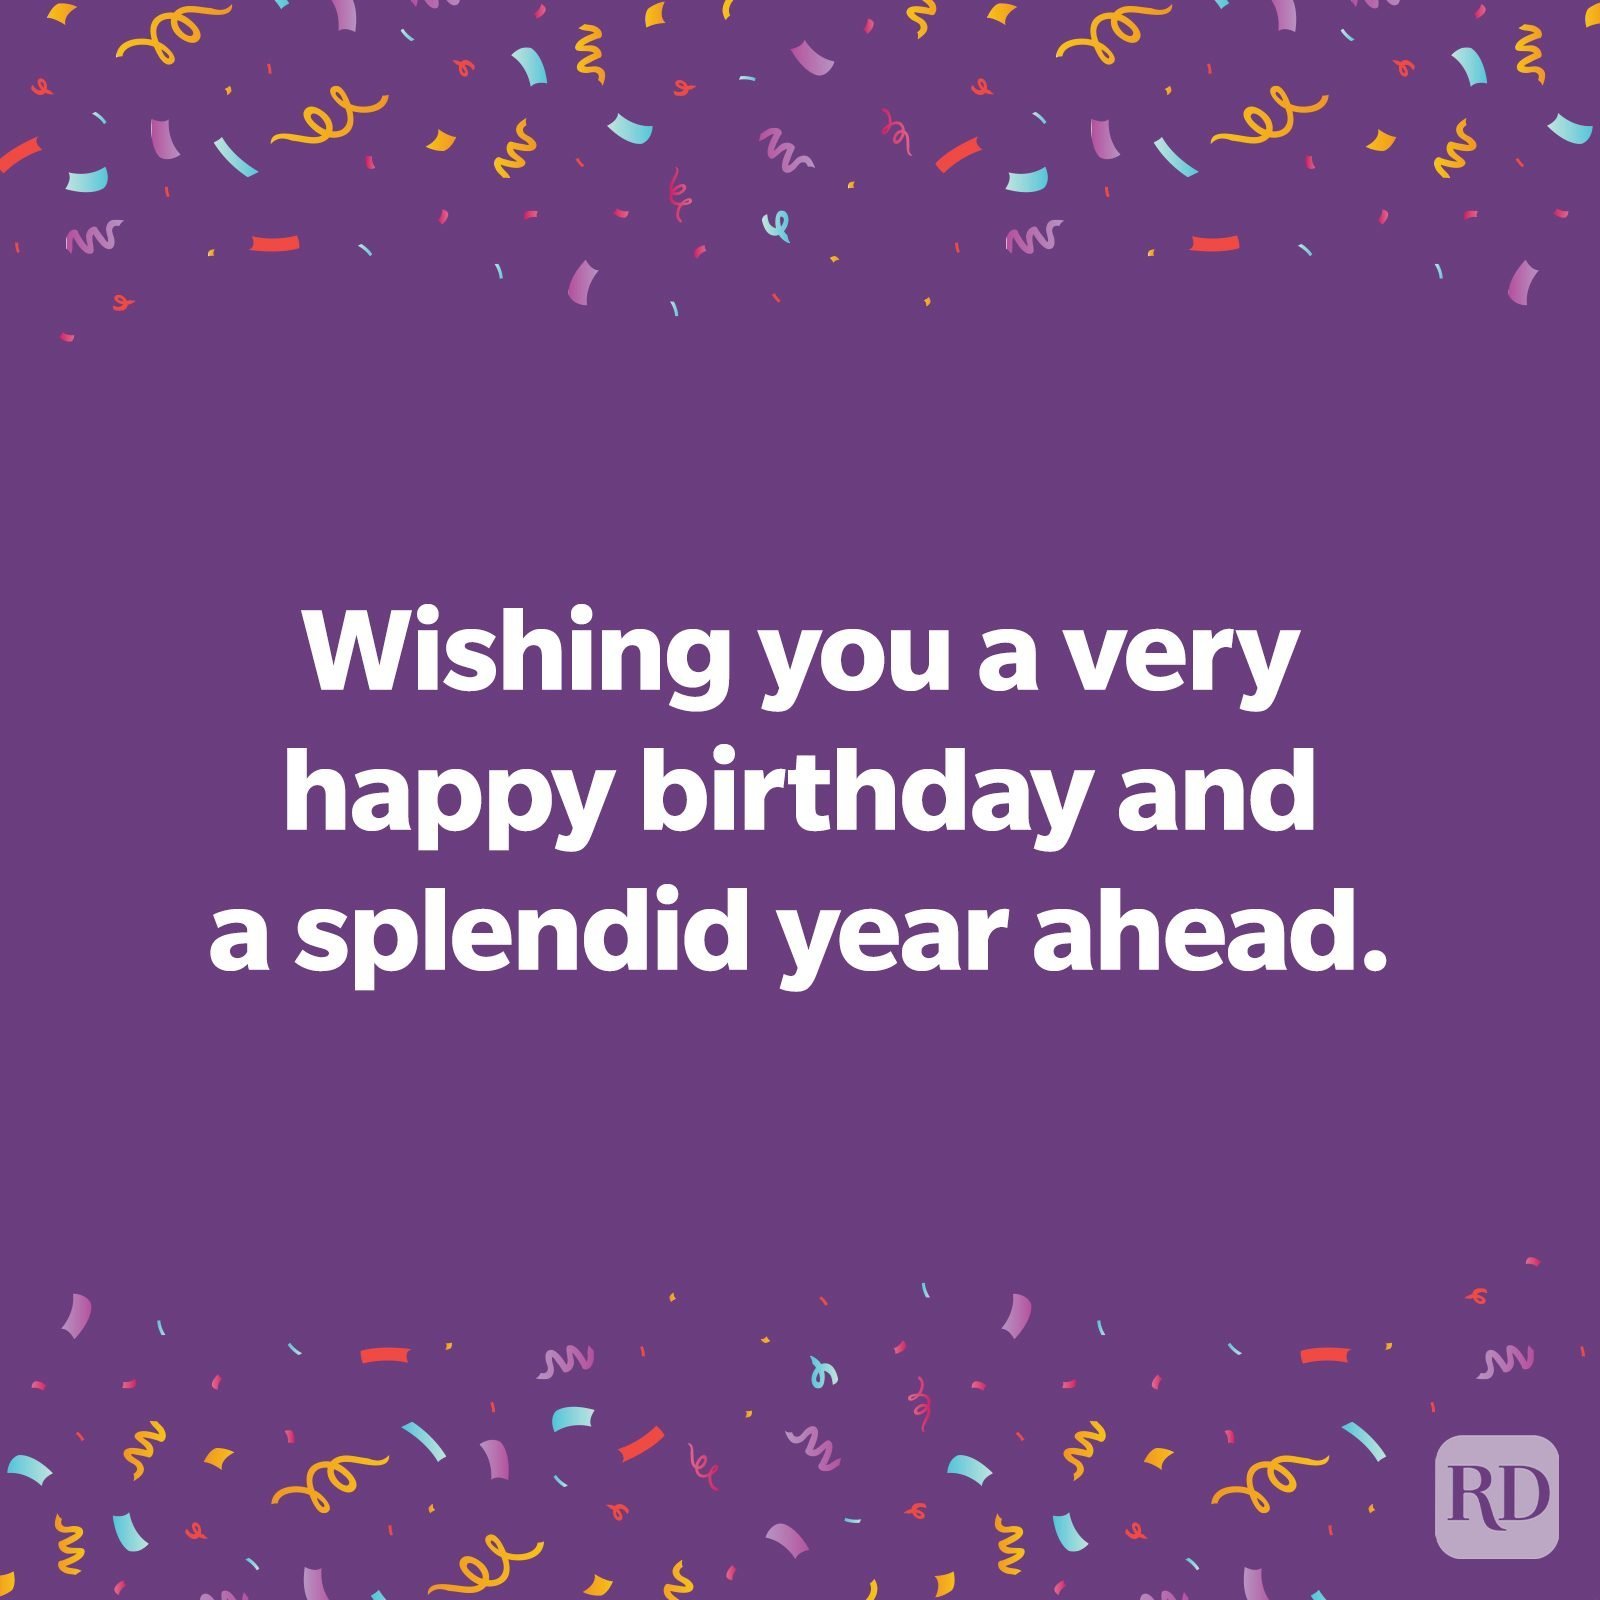 100 Happy Birthday Messages That Will Make Everyone Smile